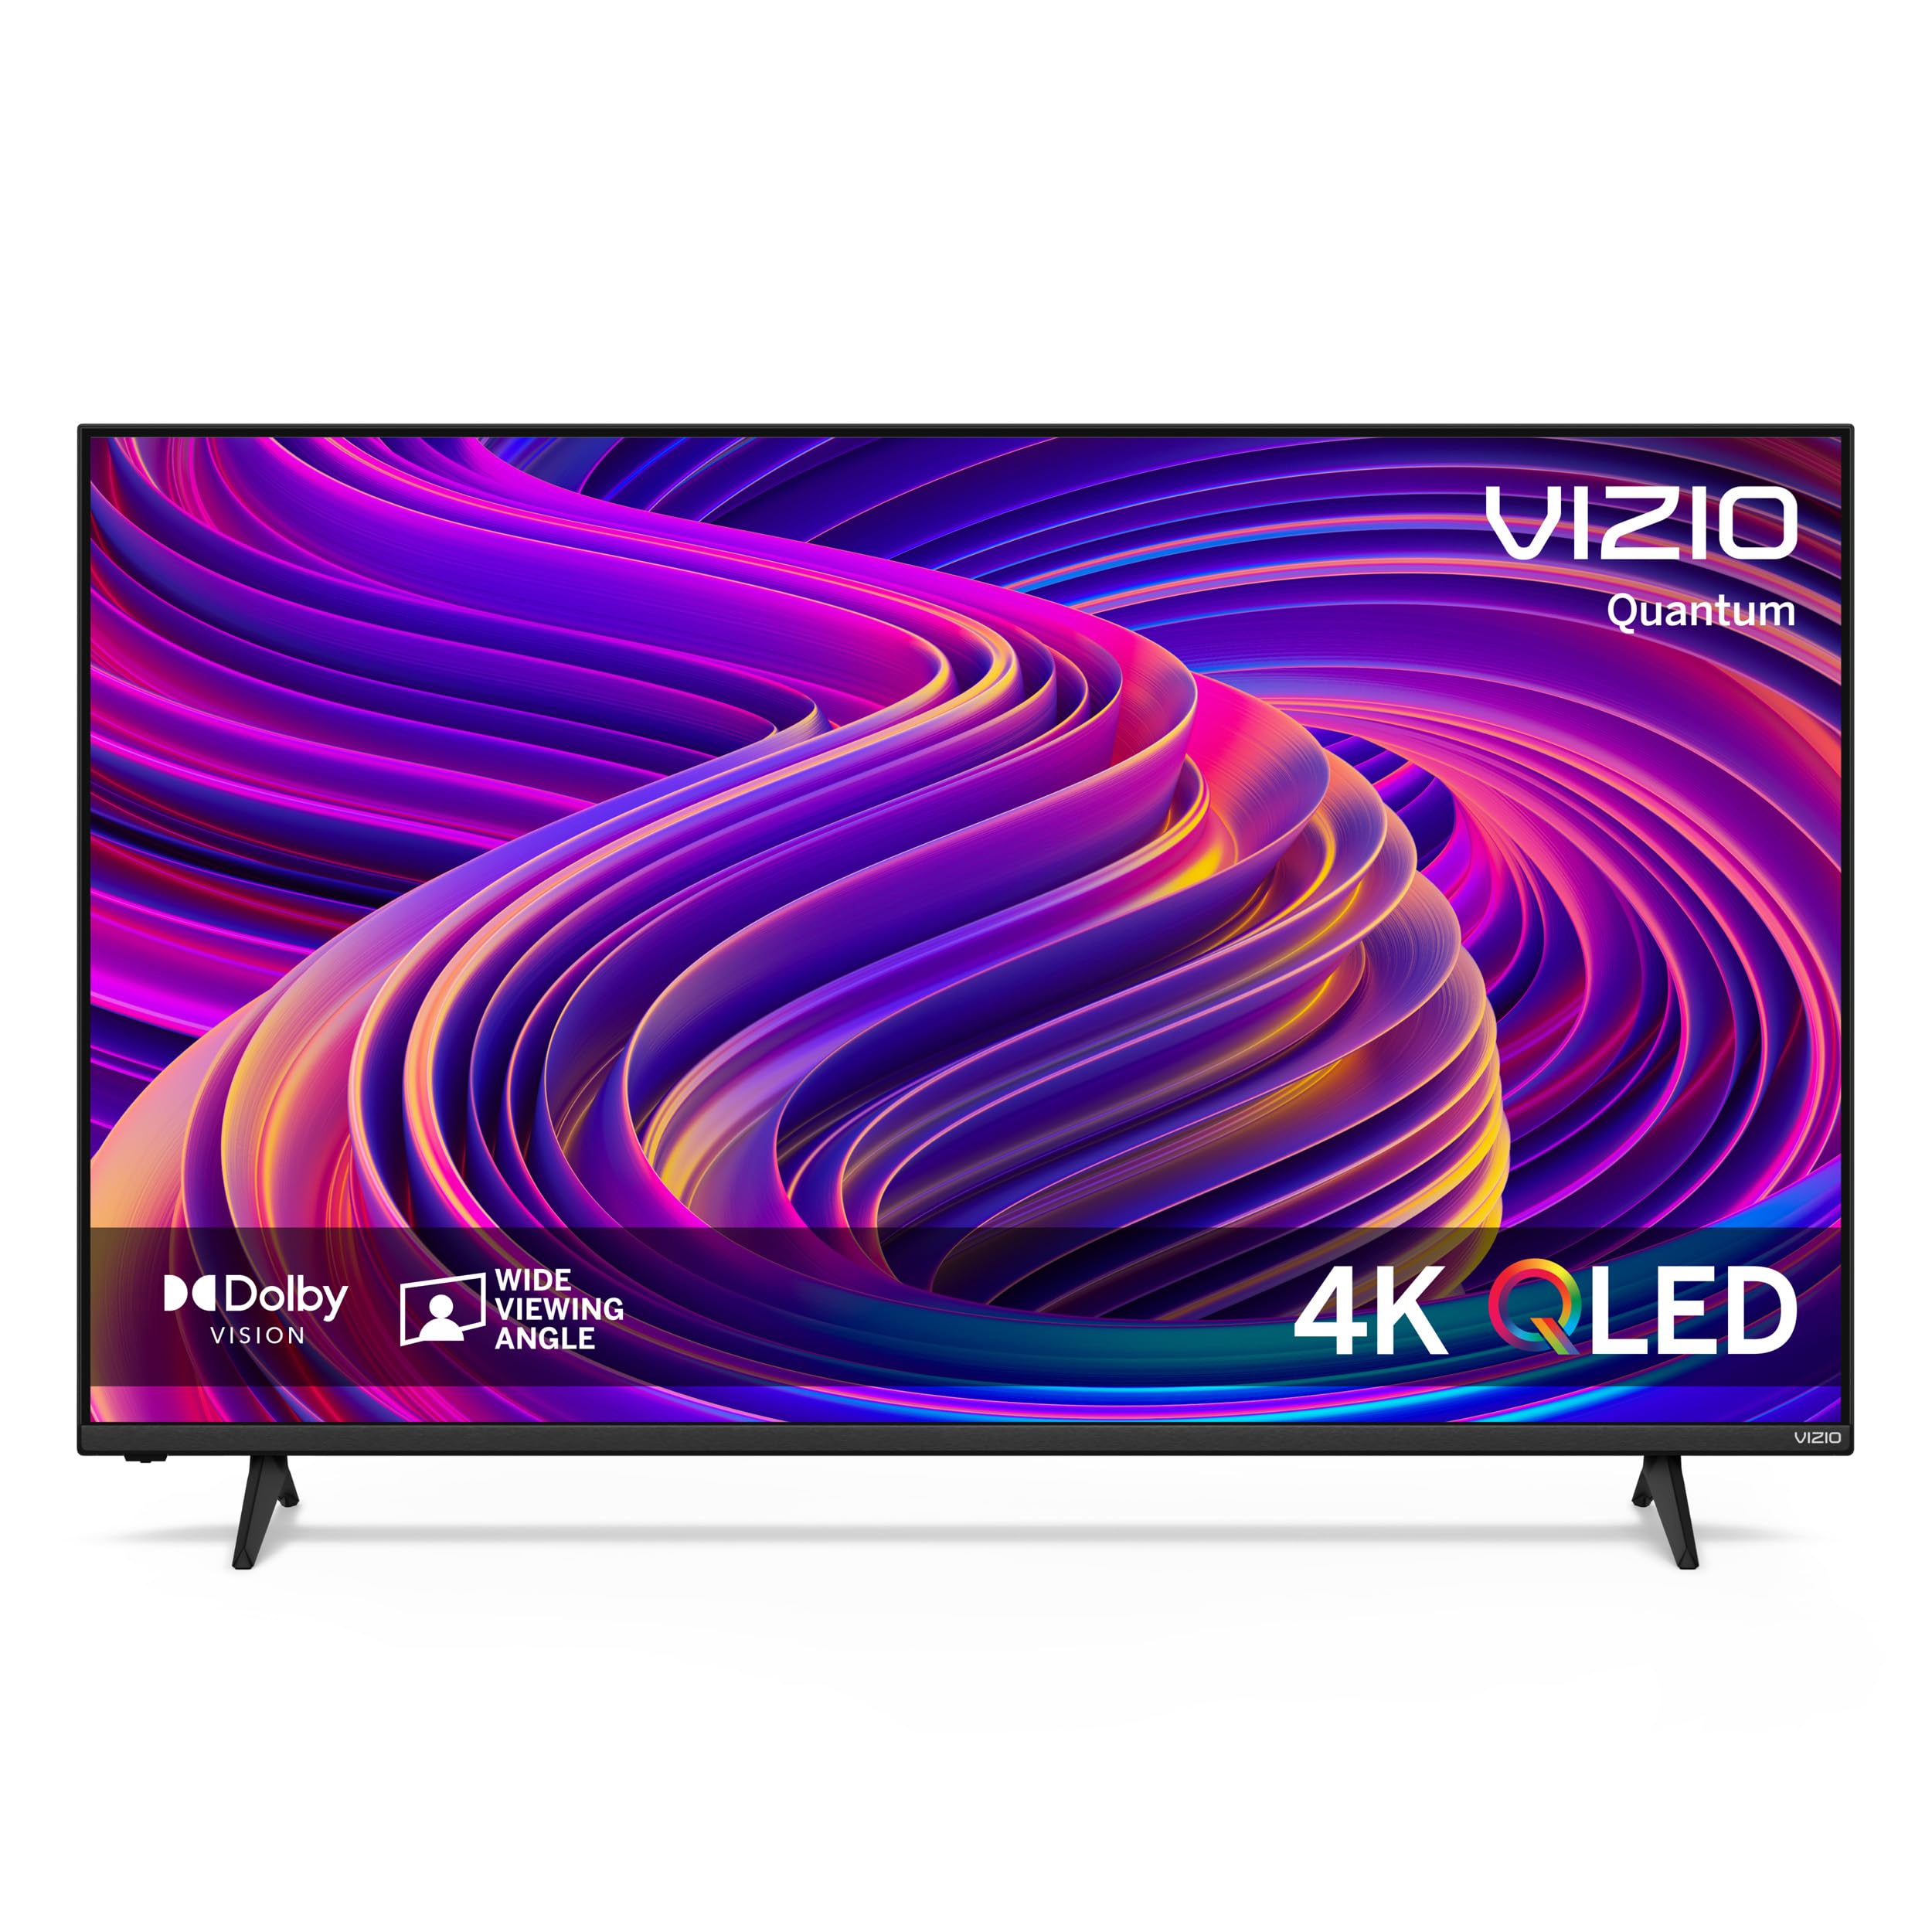 VIZIO 55-inch Quantum 4K QLED Smart TV with Dolby Vision, WiFi 6, Bluetooth Headphone Capable, Apple AirPlay, Chromecast Built-in (New)- M55Q6-L4 (Renewed)